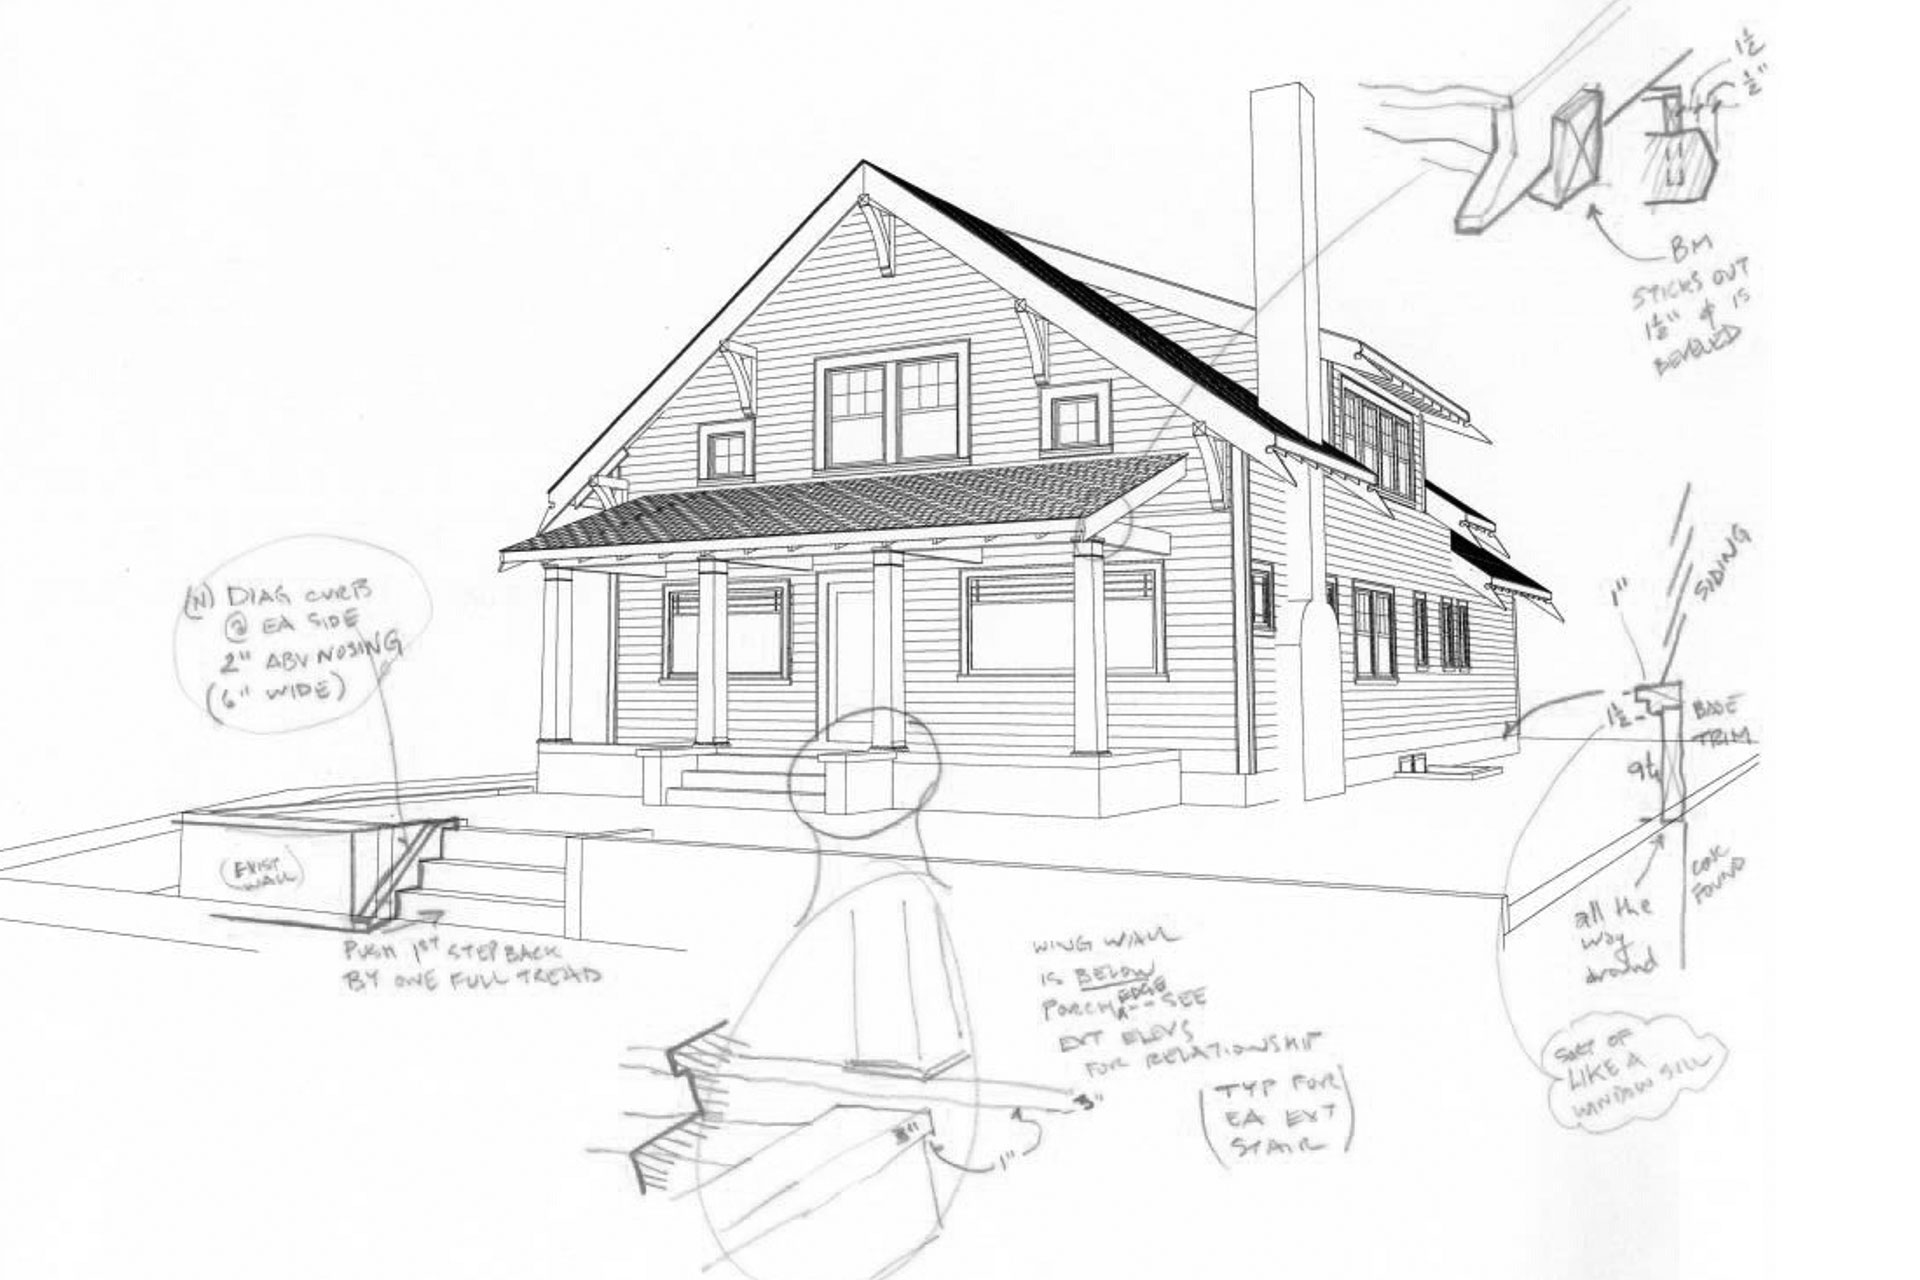 This is a sketch showing the design process for the exterior of the Alameda Craftsman.